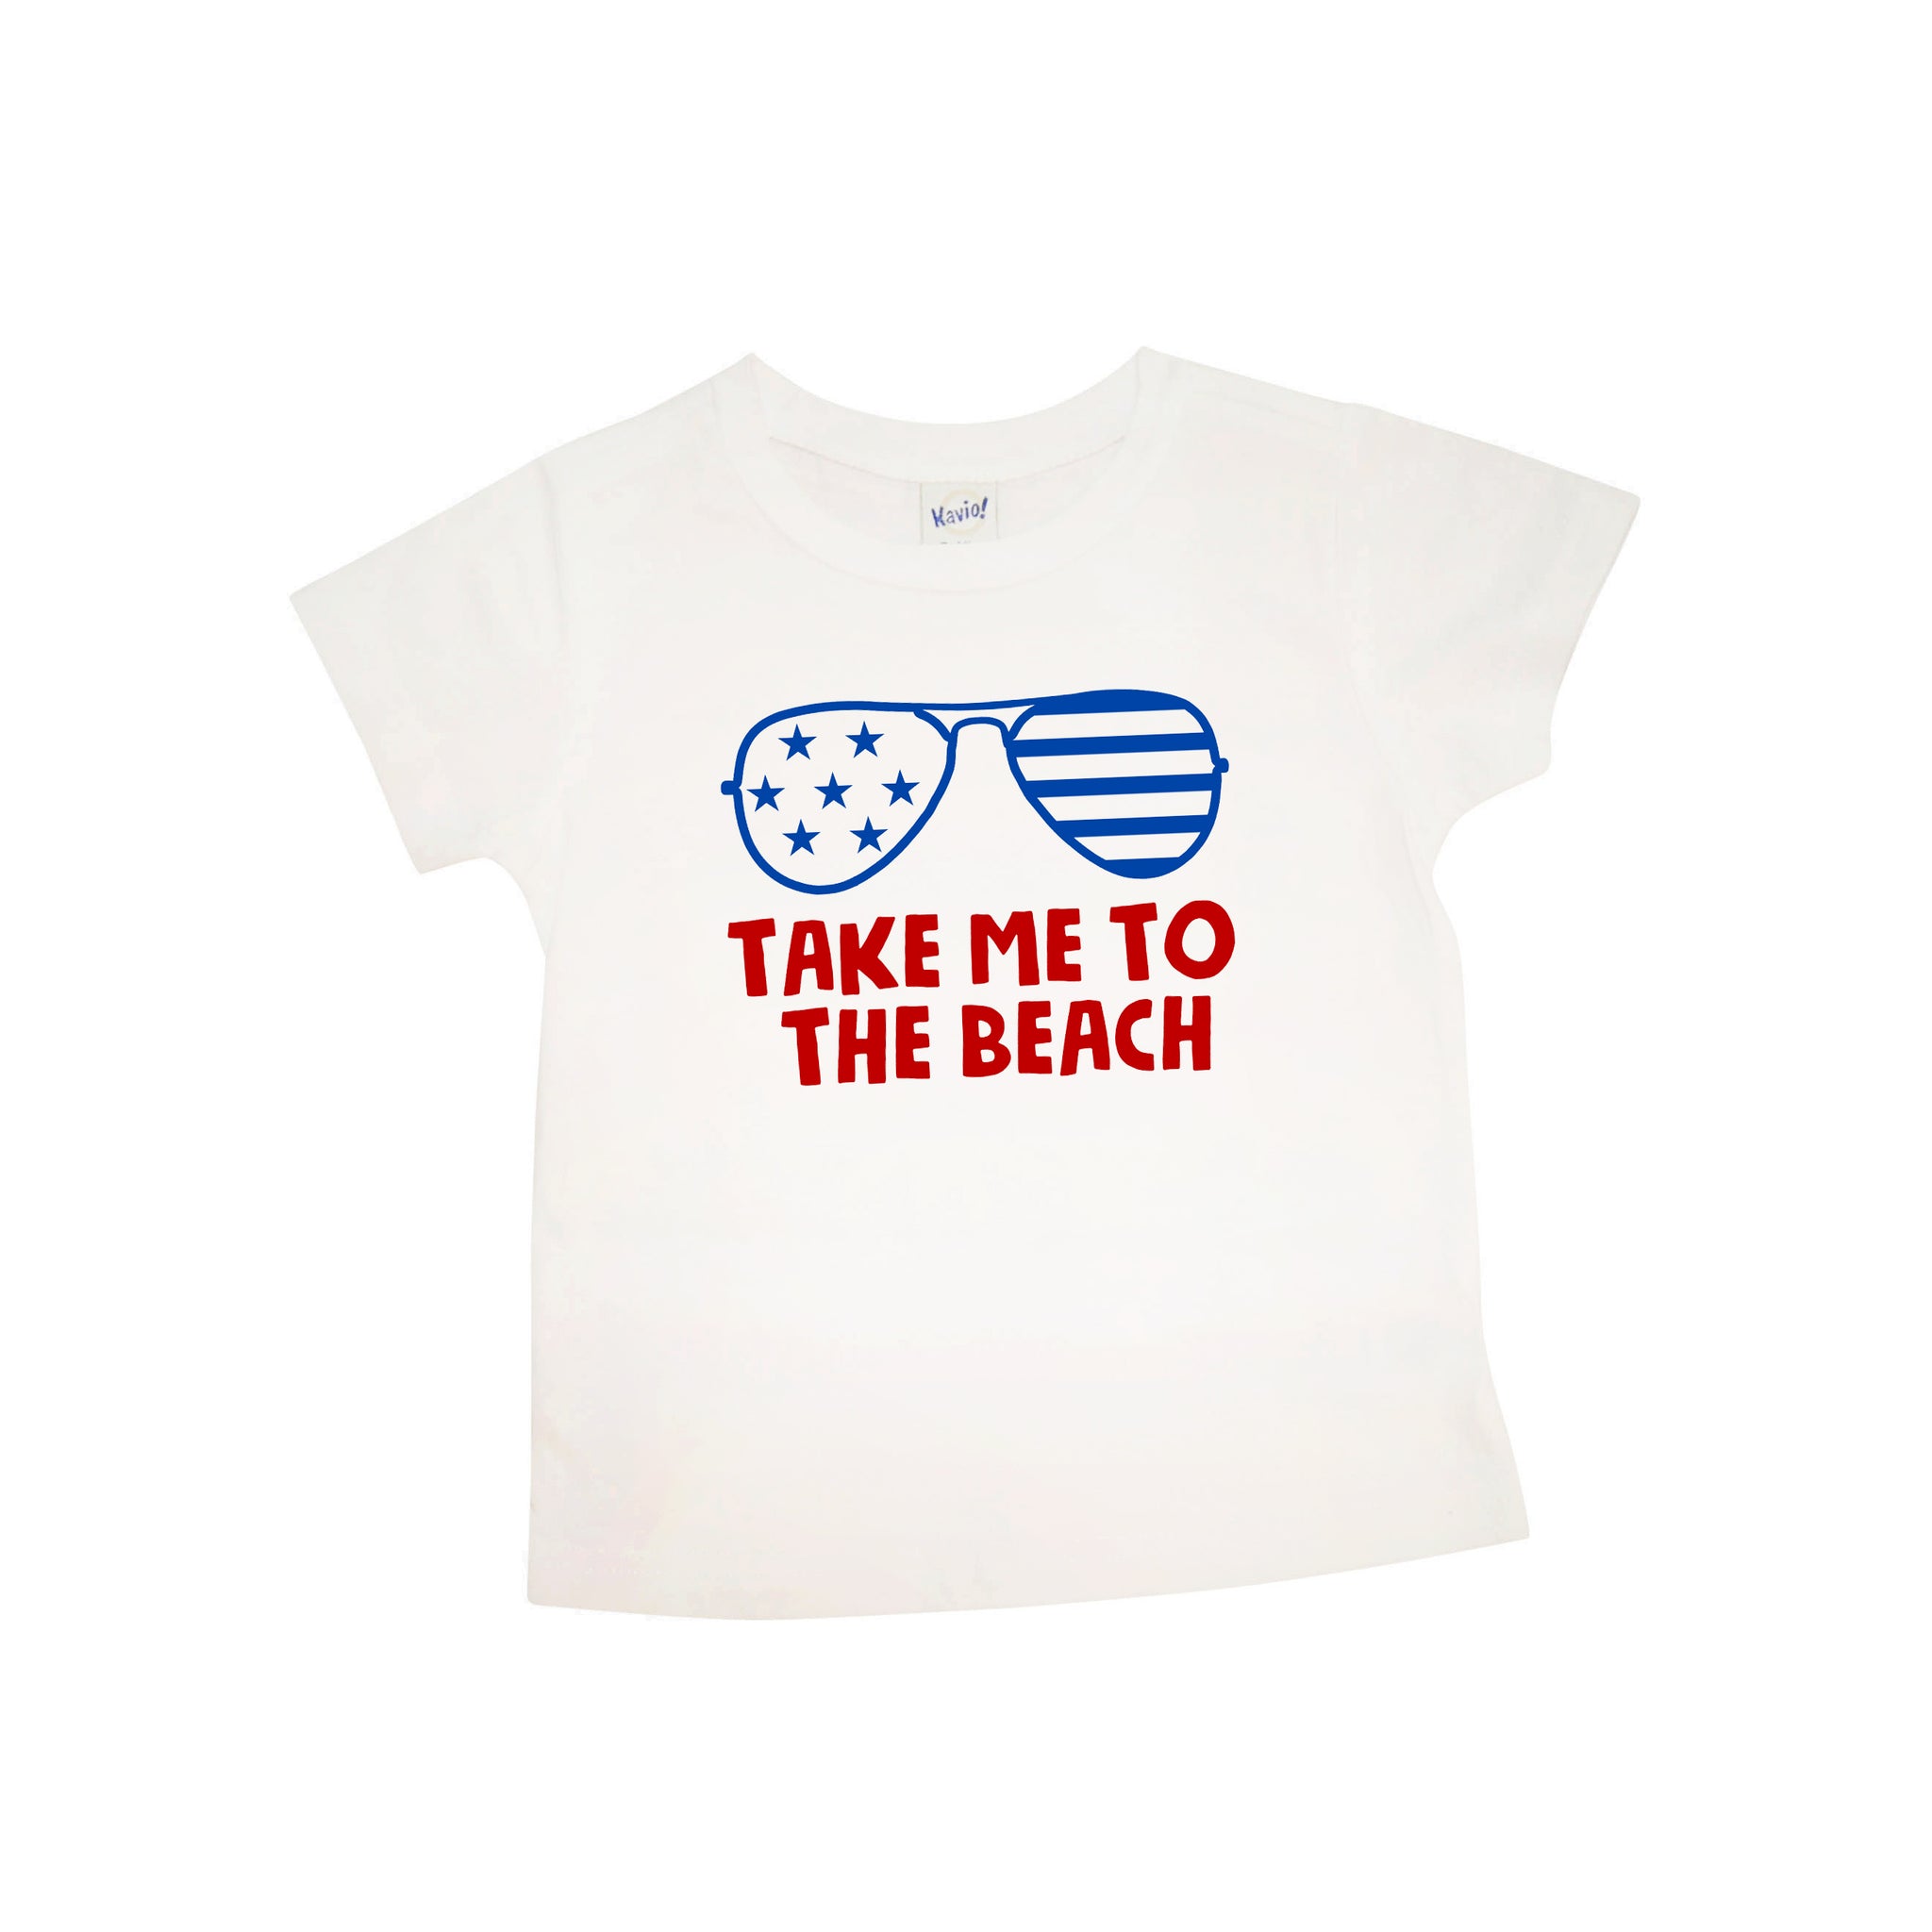 Take Me To The Beach with Sunglasses | Short Sleeve White Shirt | Fourth of July, Girls, Boys | 426